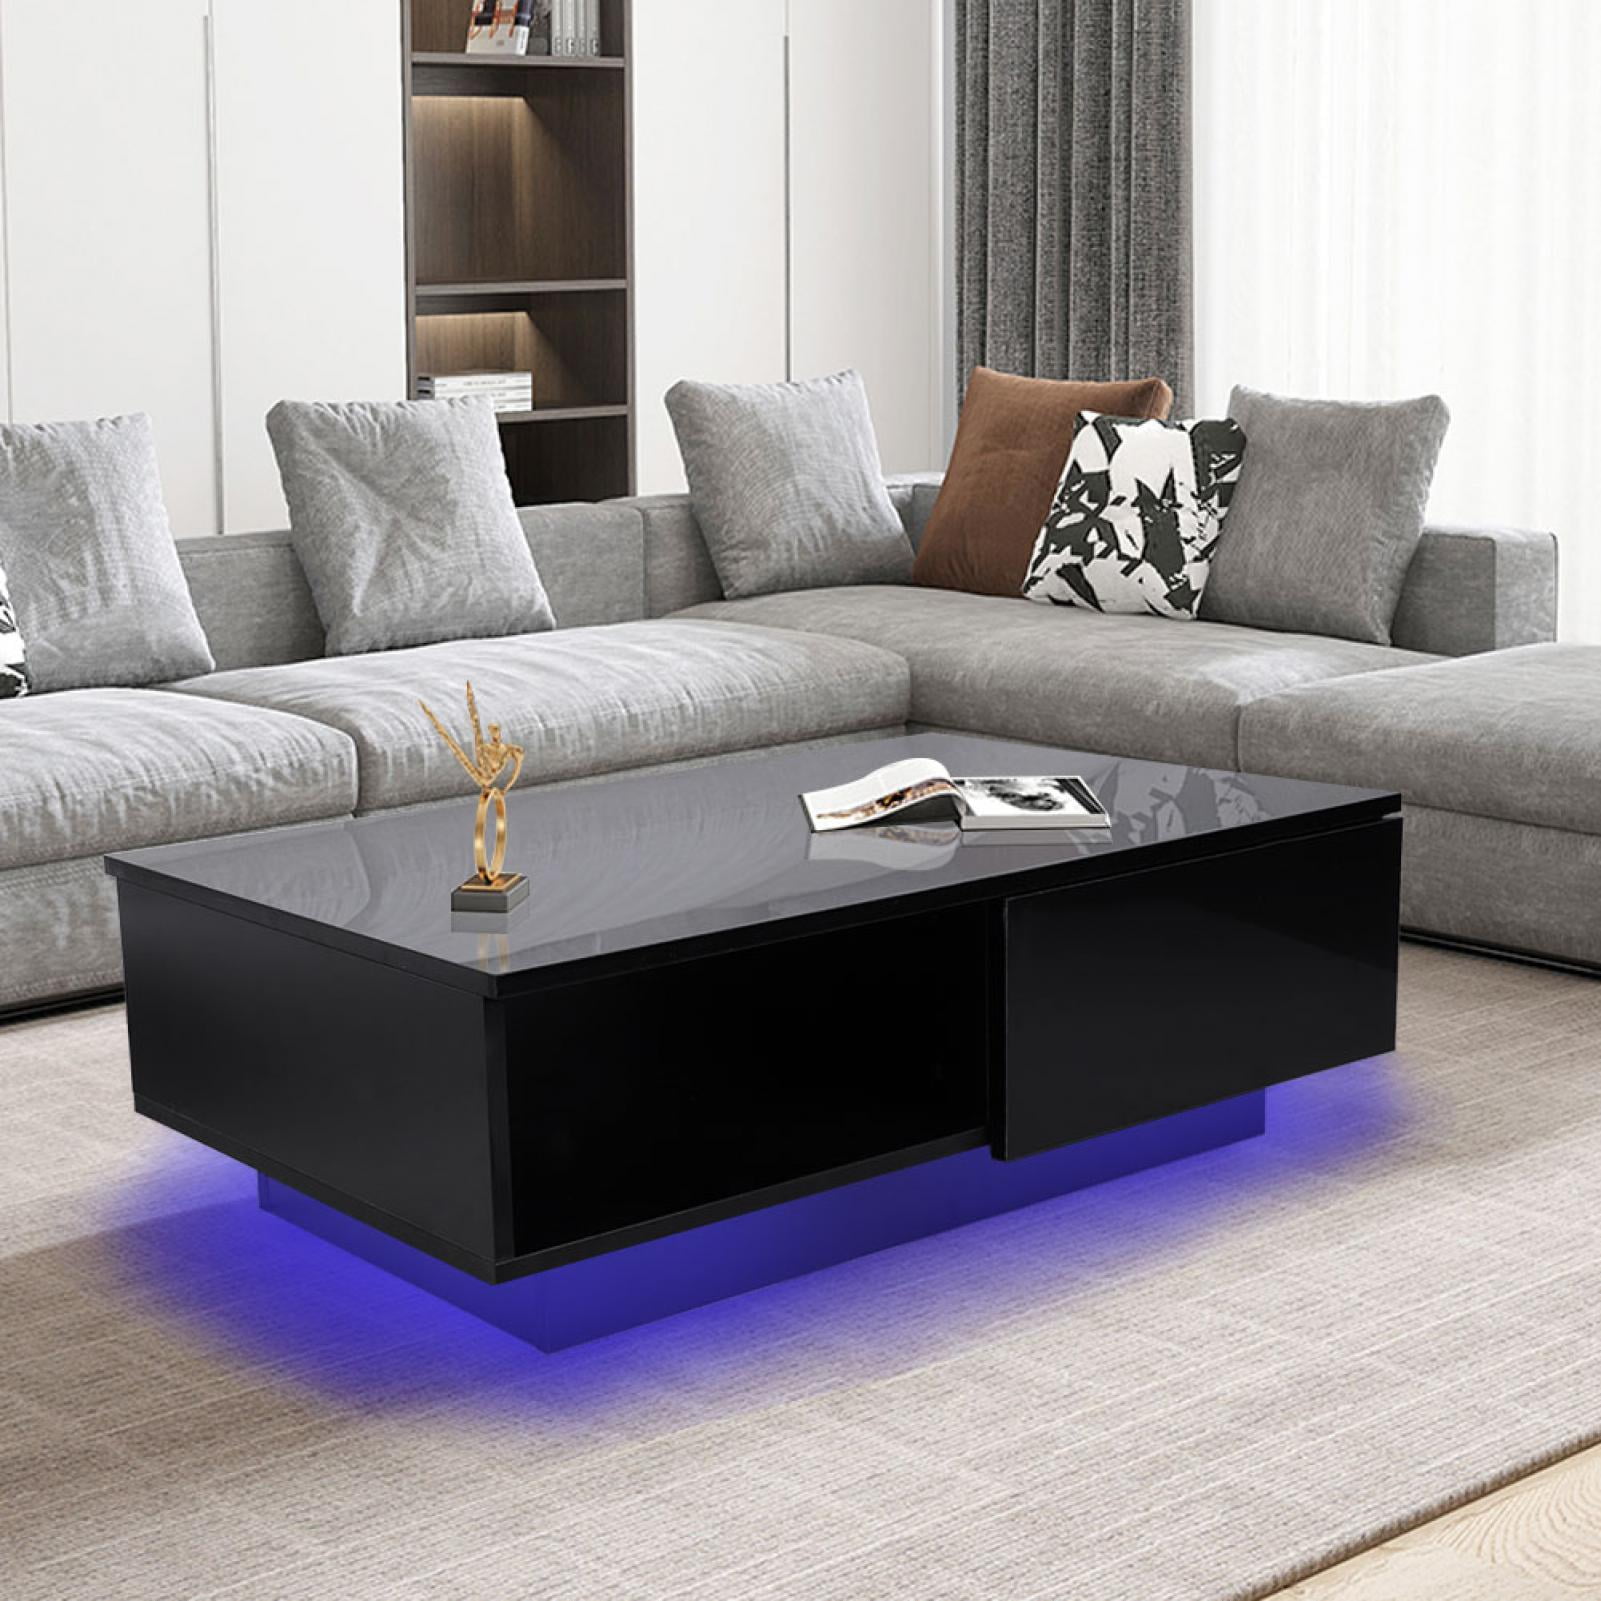 High Gloss Coffee Table Wooden Drawer Storage Modern Living Room Furniture